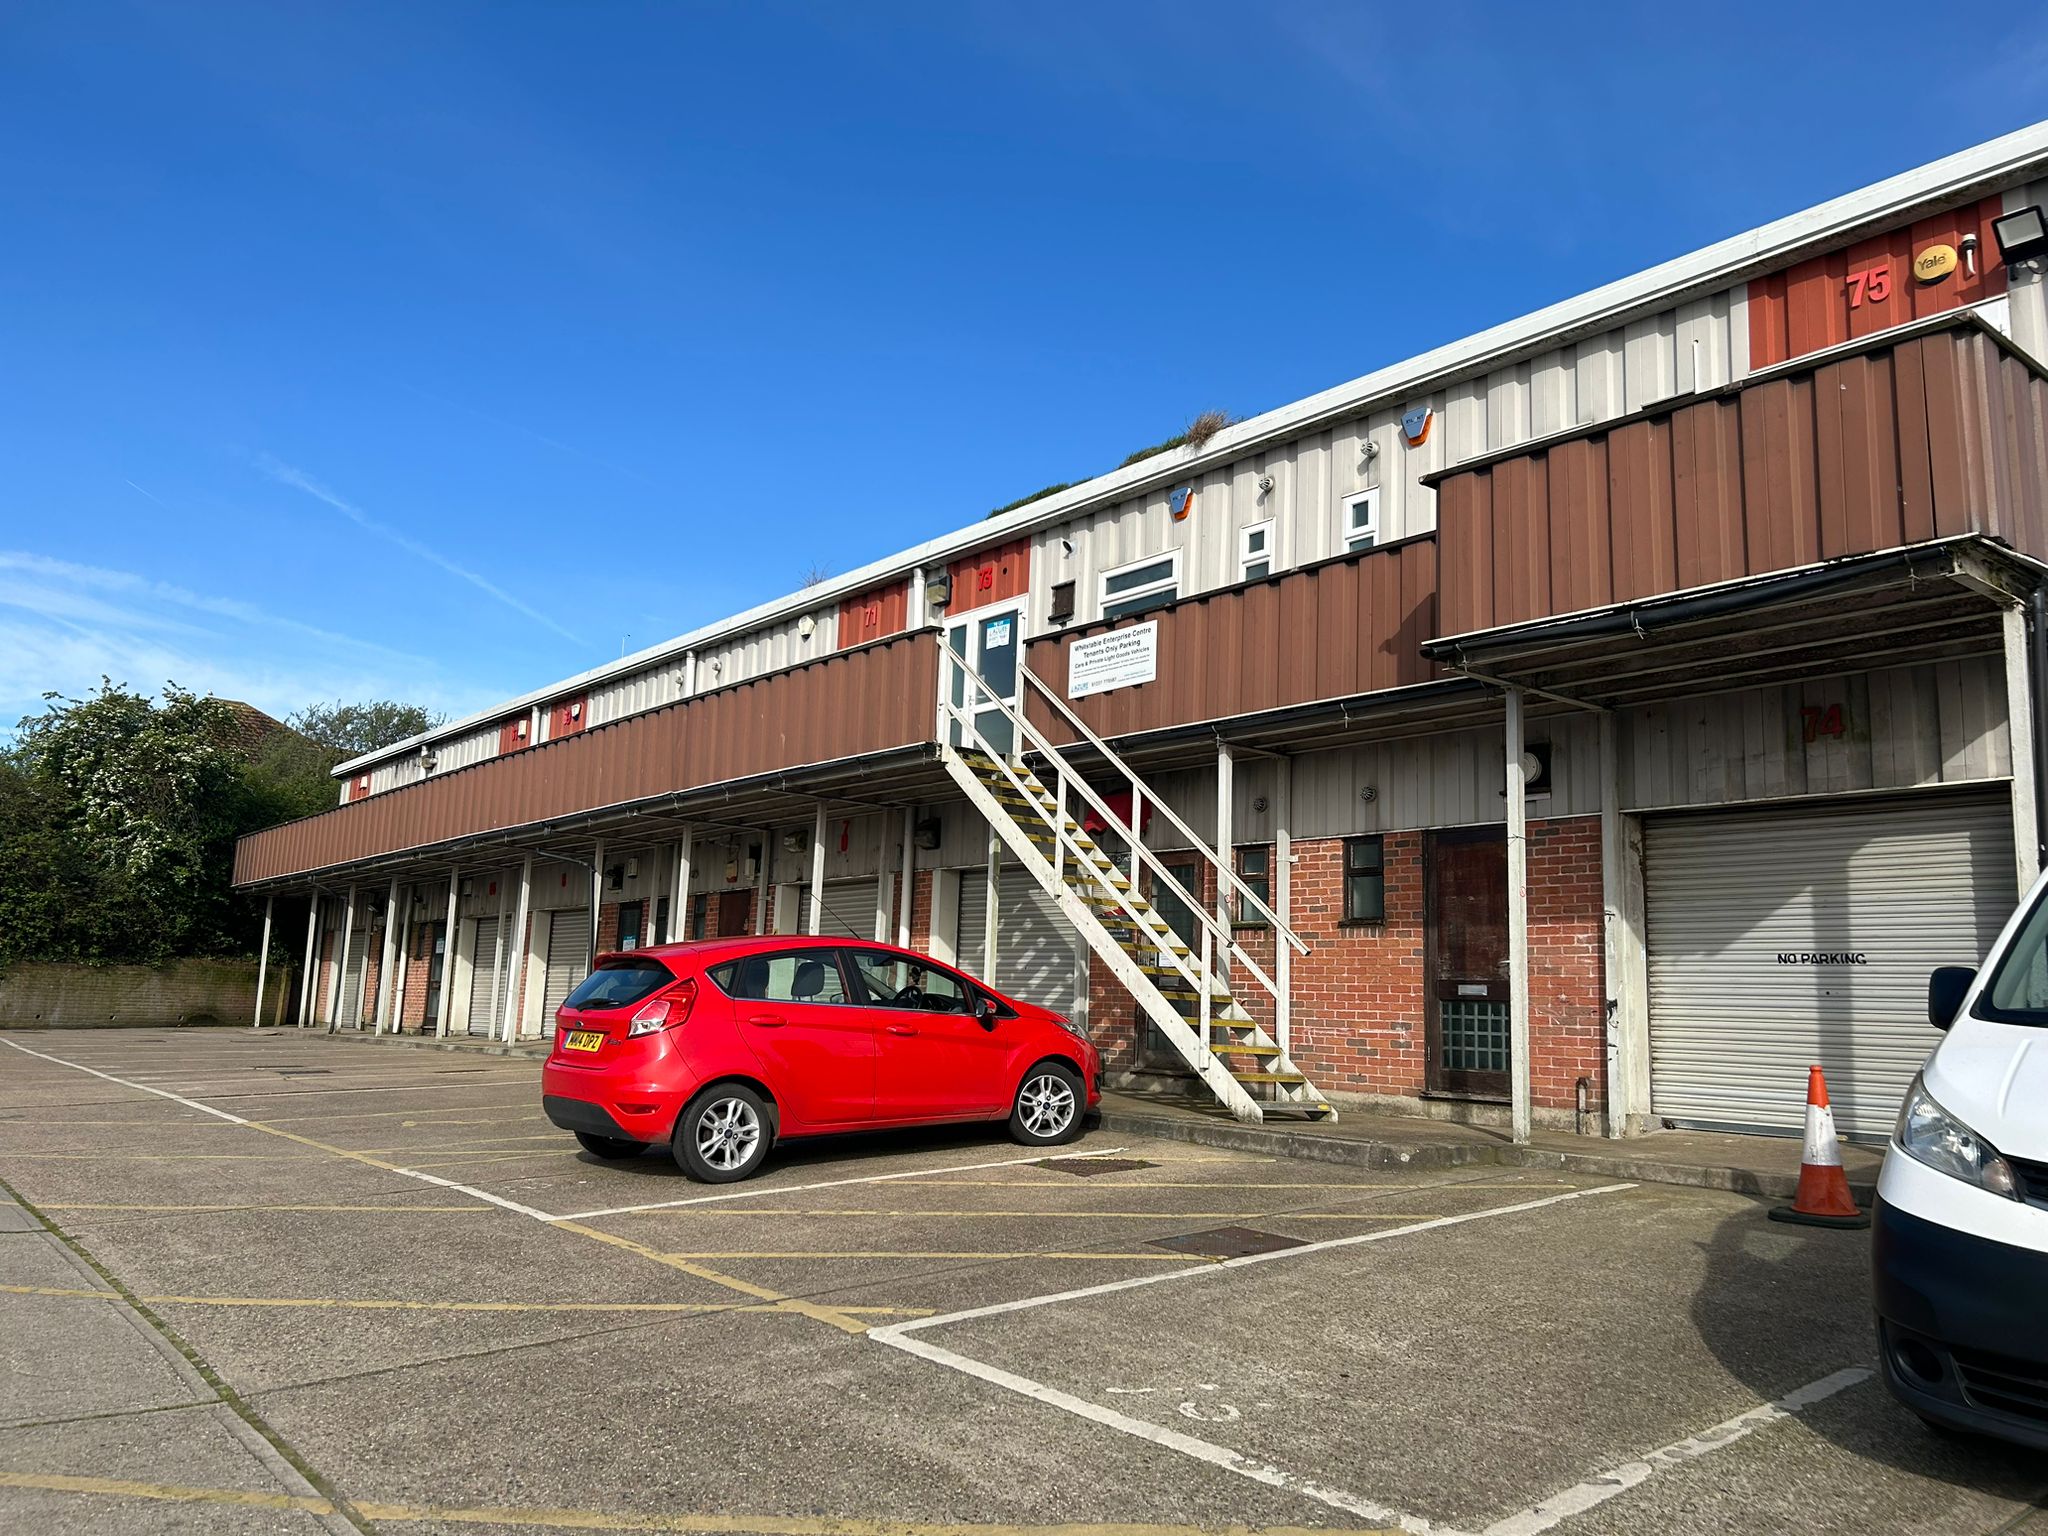 Light Industrial for rent in Whitstable. From Azure Property Consultants